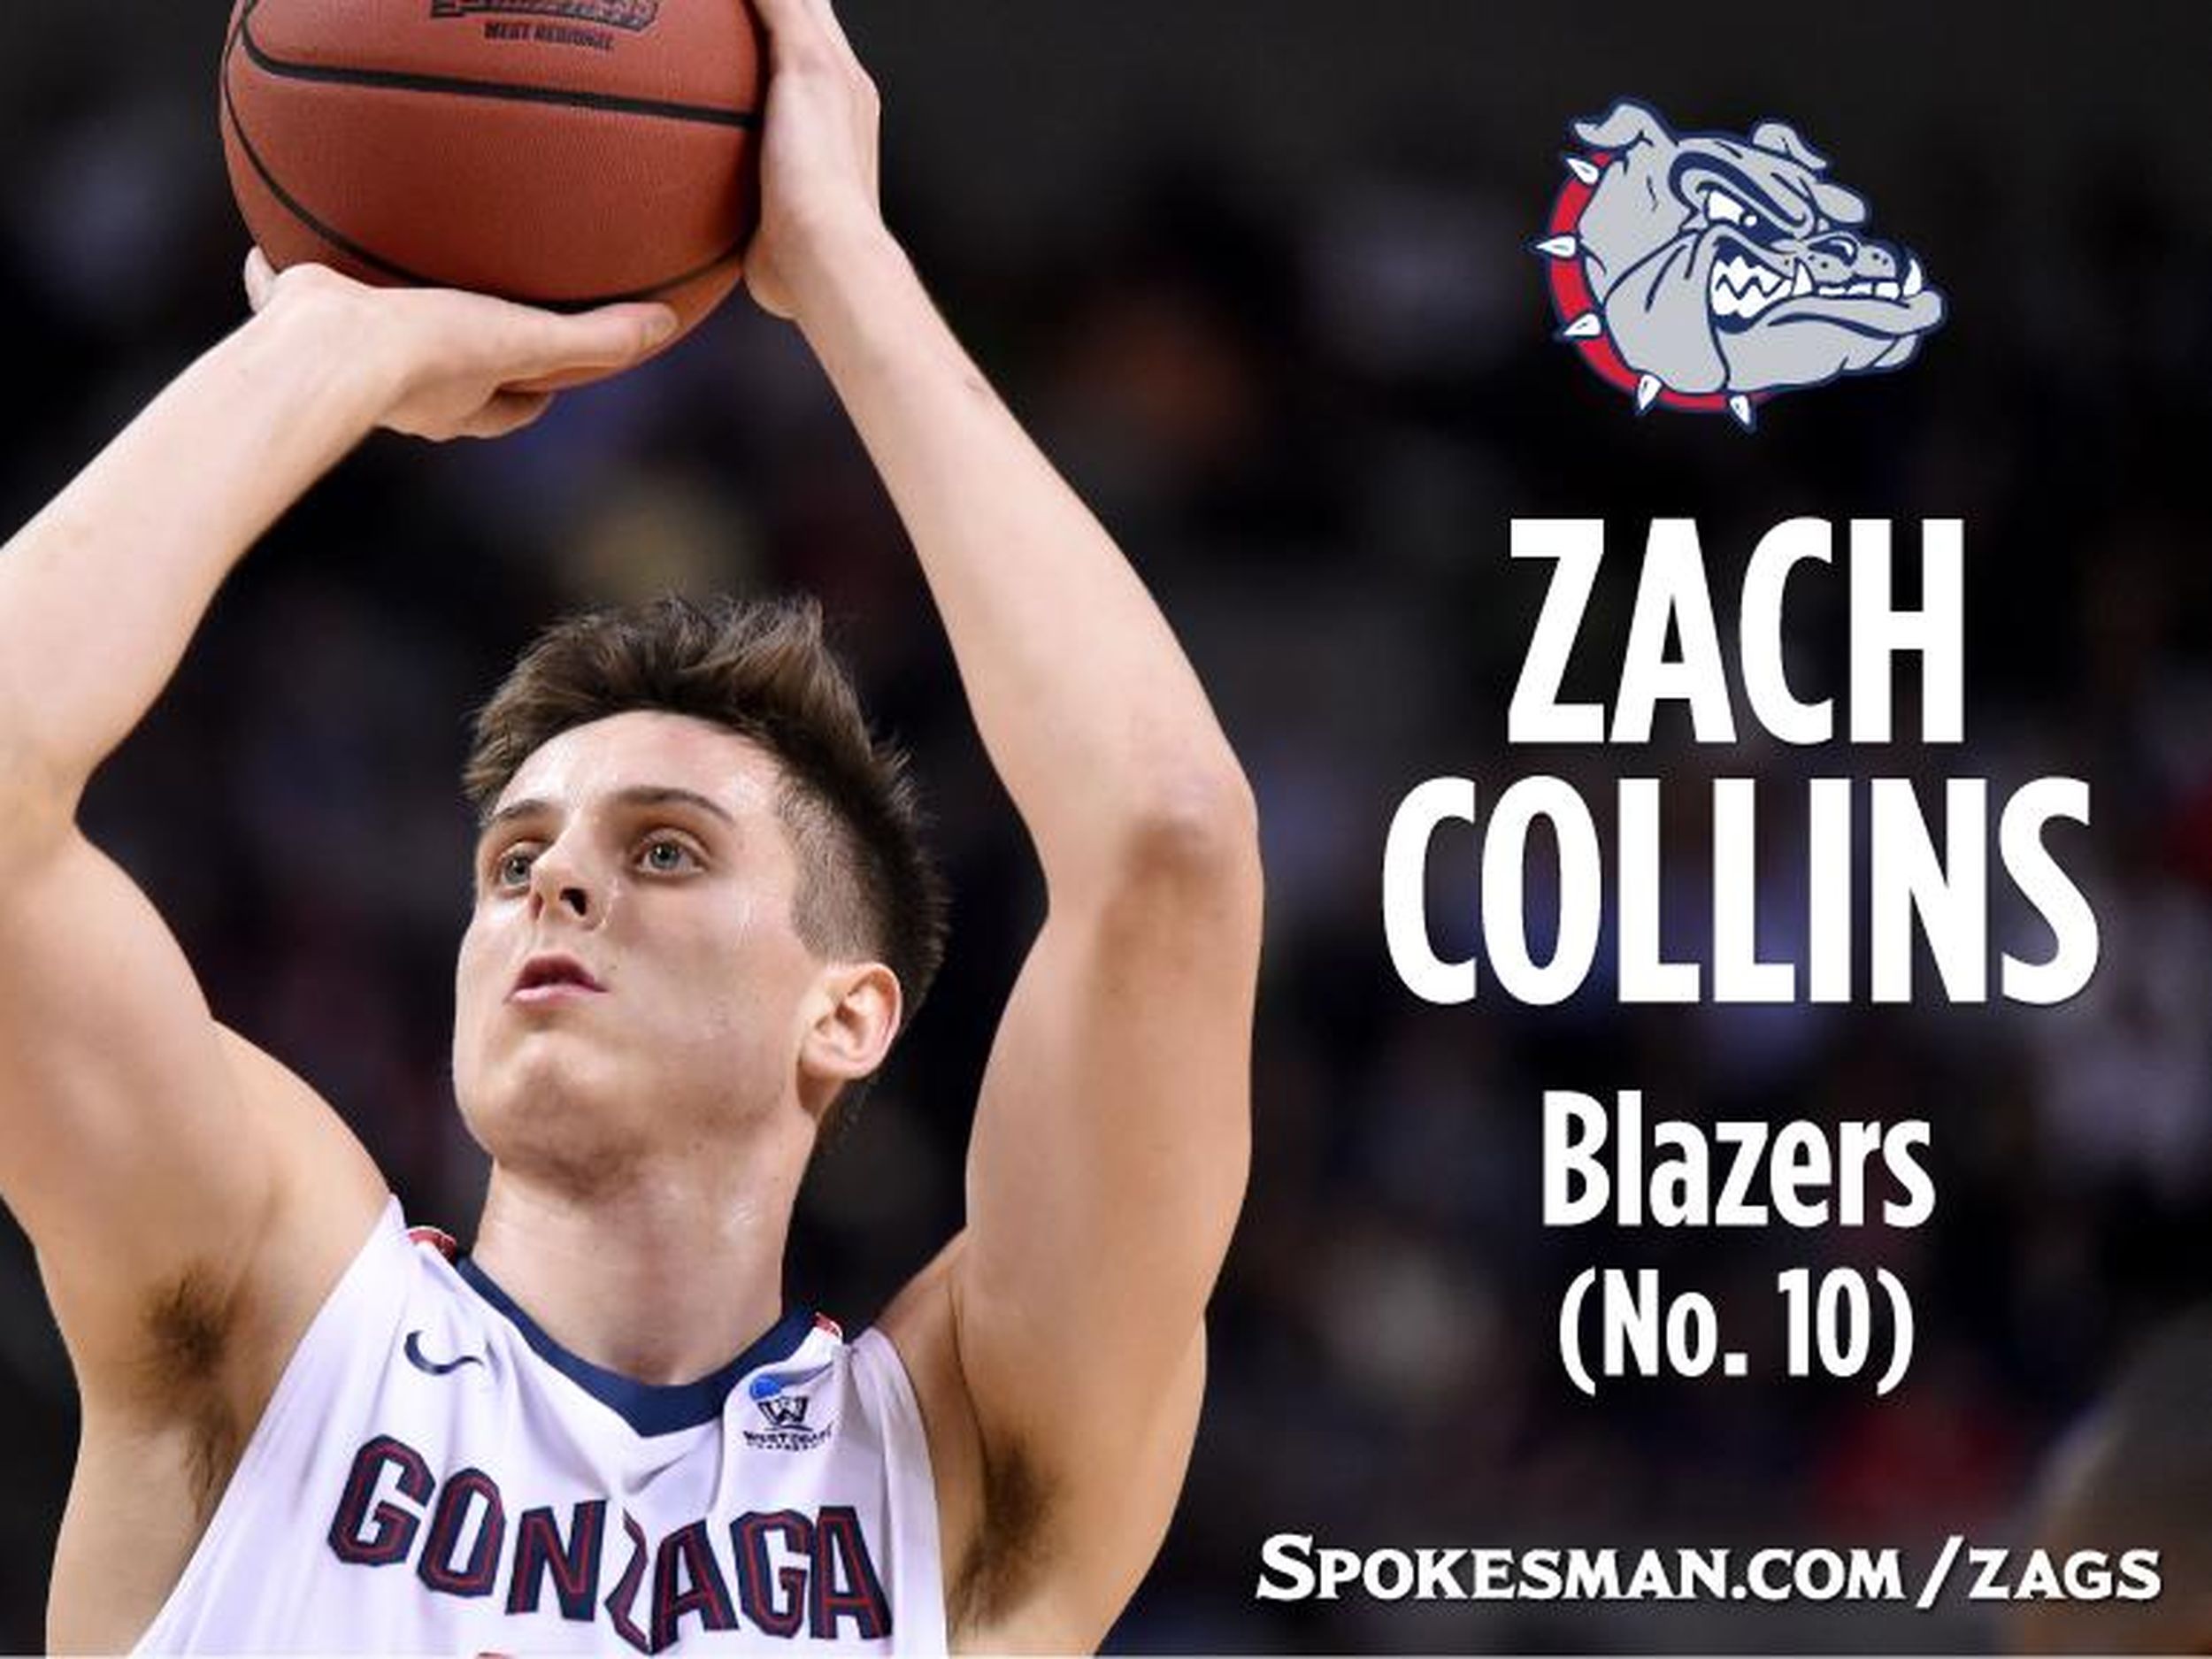 Gonzaga's Zach Collins quickly shapes up as NBA prospect